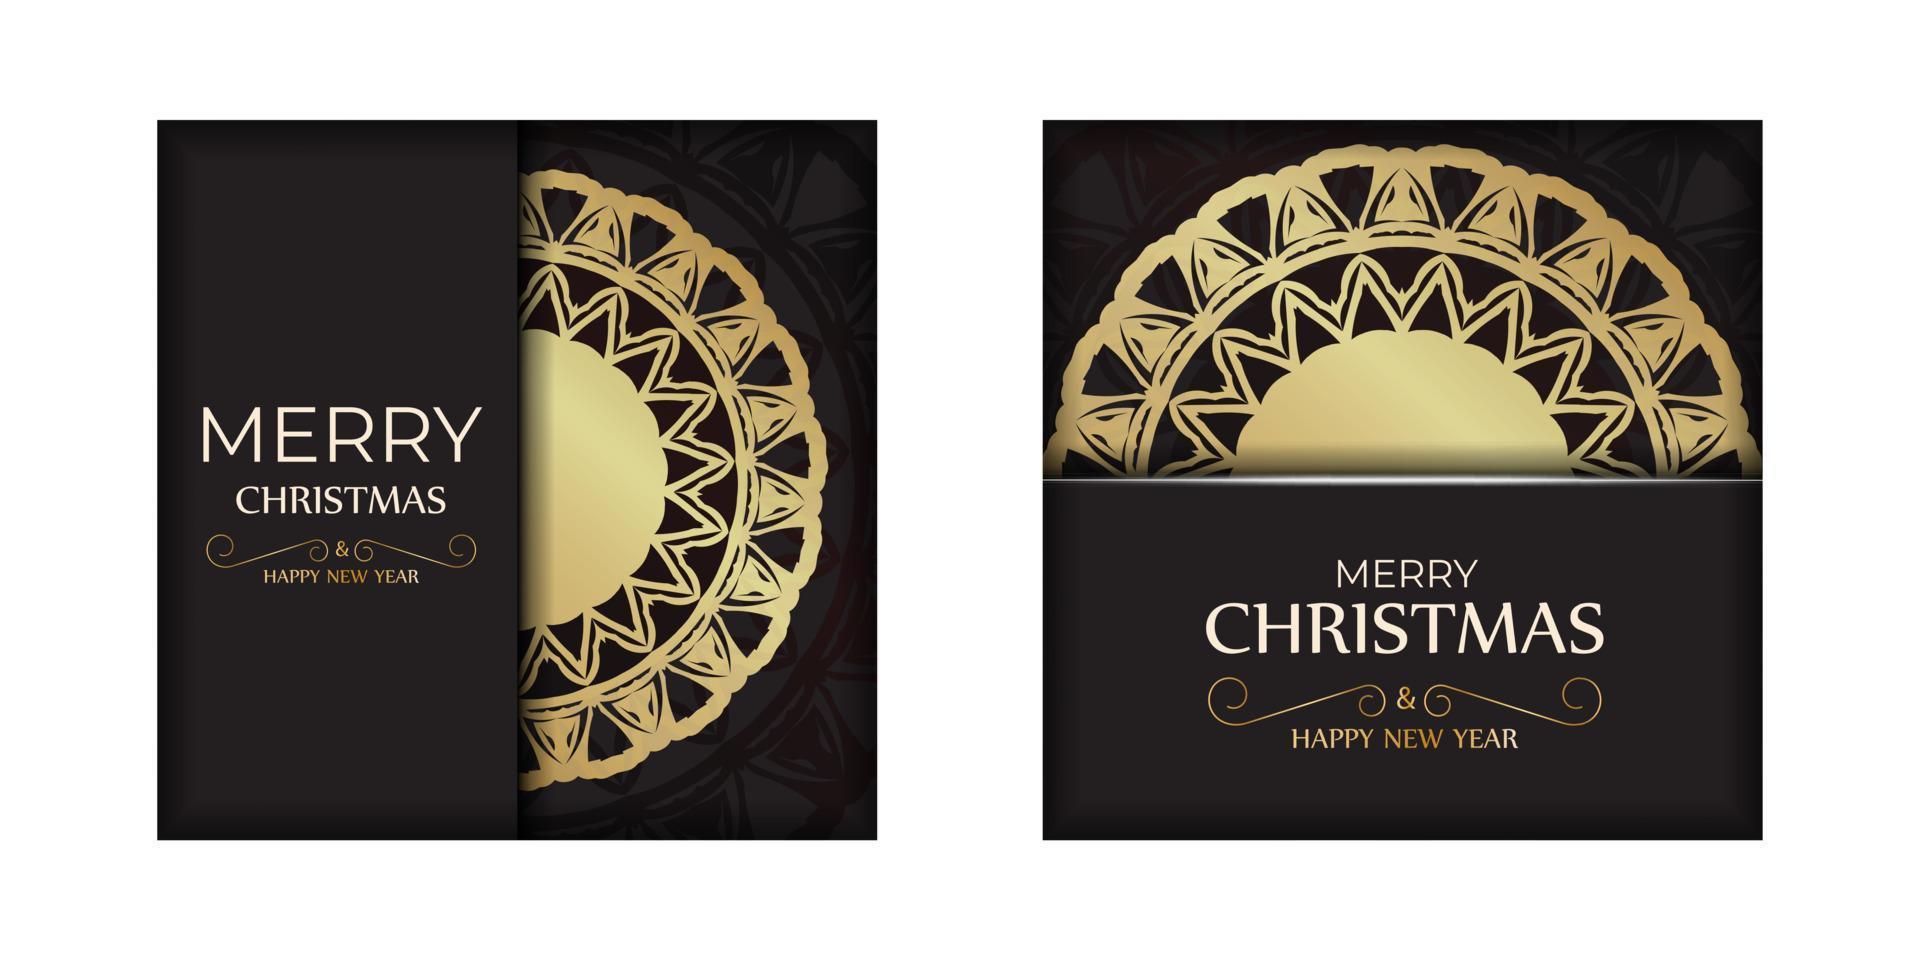 Greeting Card Happy New Year and Merry Christmas in black color with gold ornaments. vector